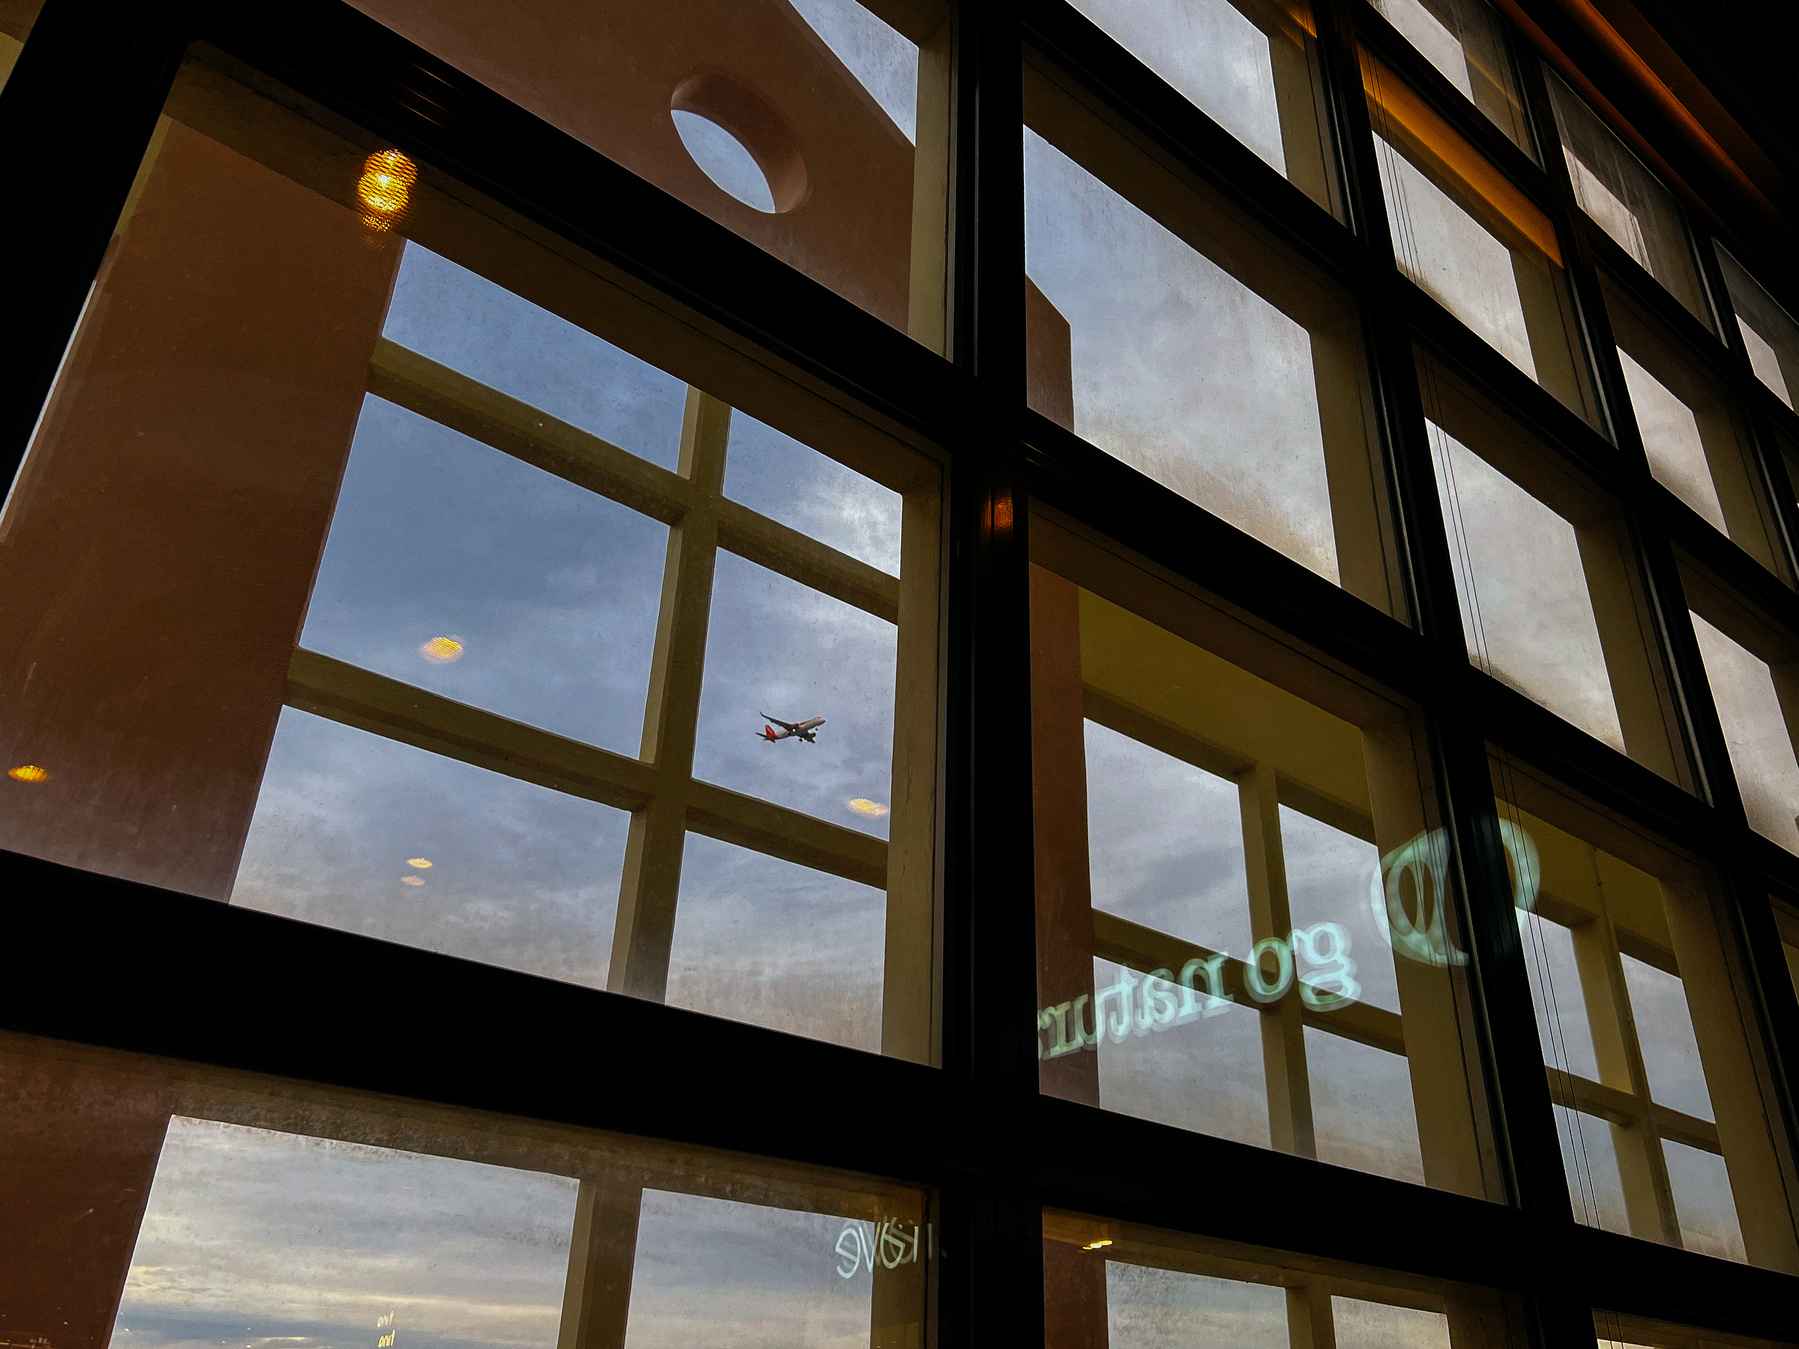 An airplane seen through large paneled windows, with warm indoor lighting and reflections on the glass.